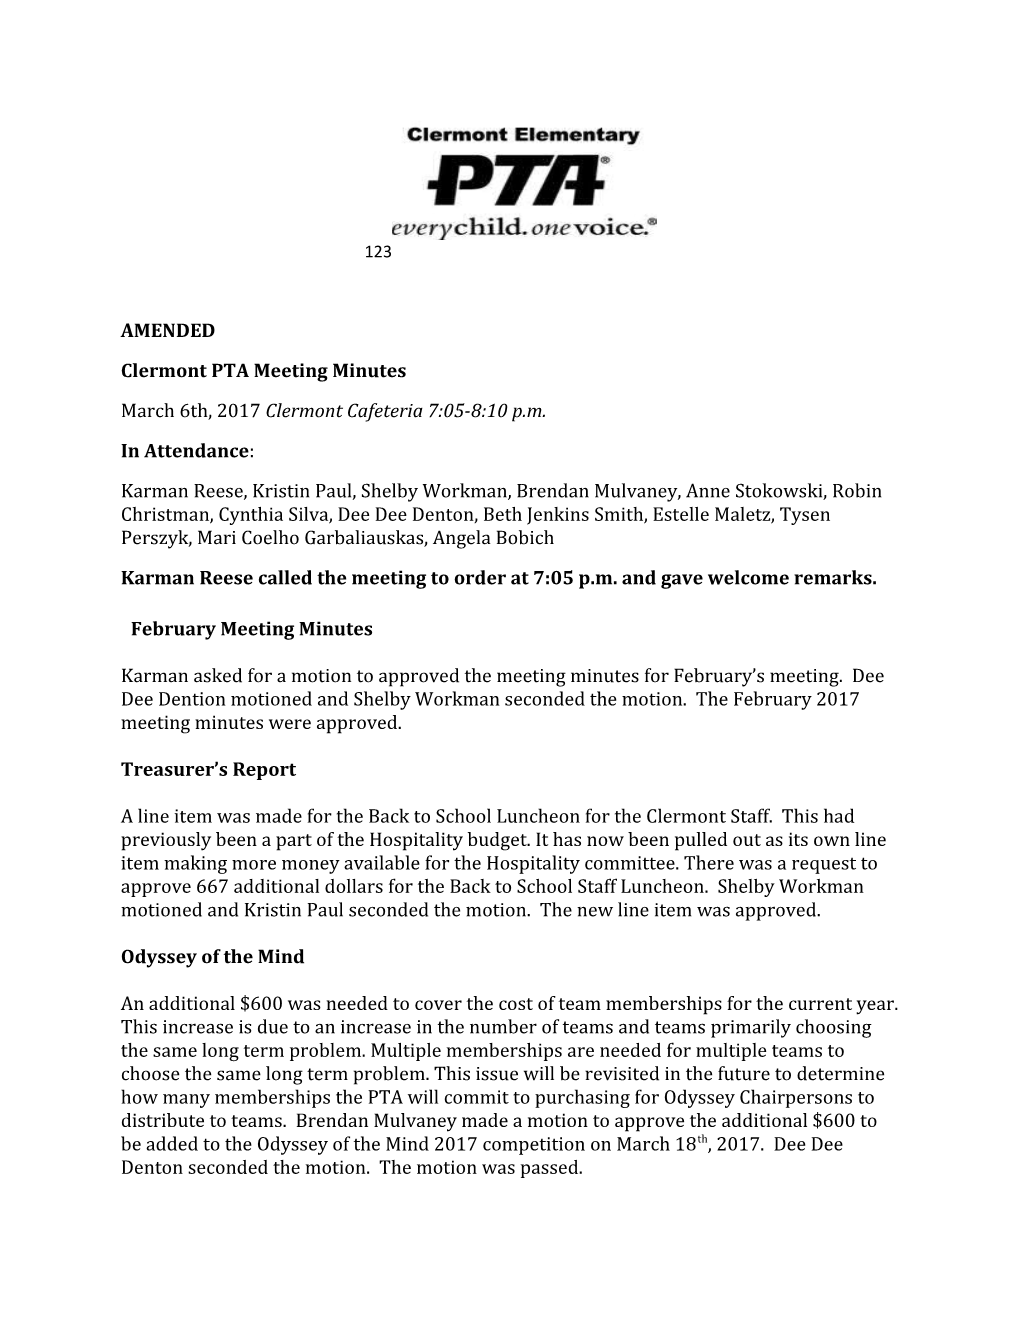 Clermont PTA Meeting Minutes s1